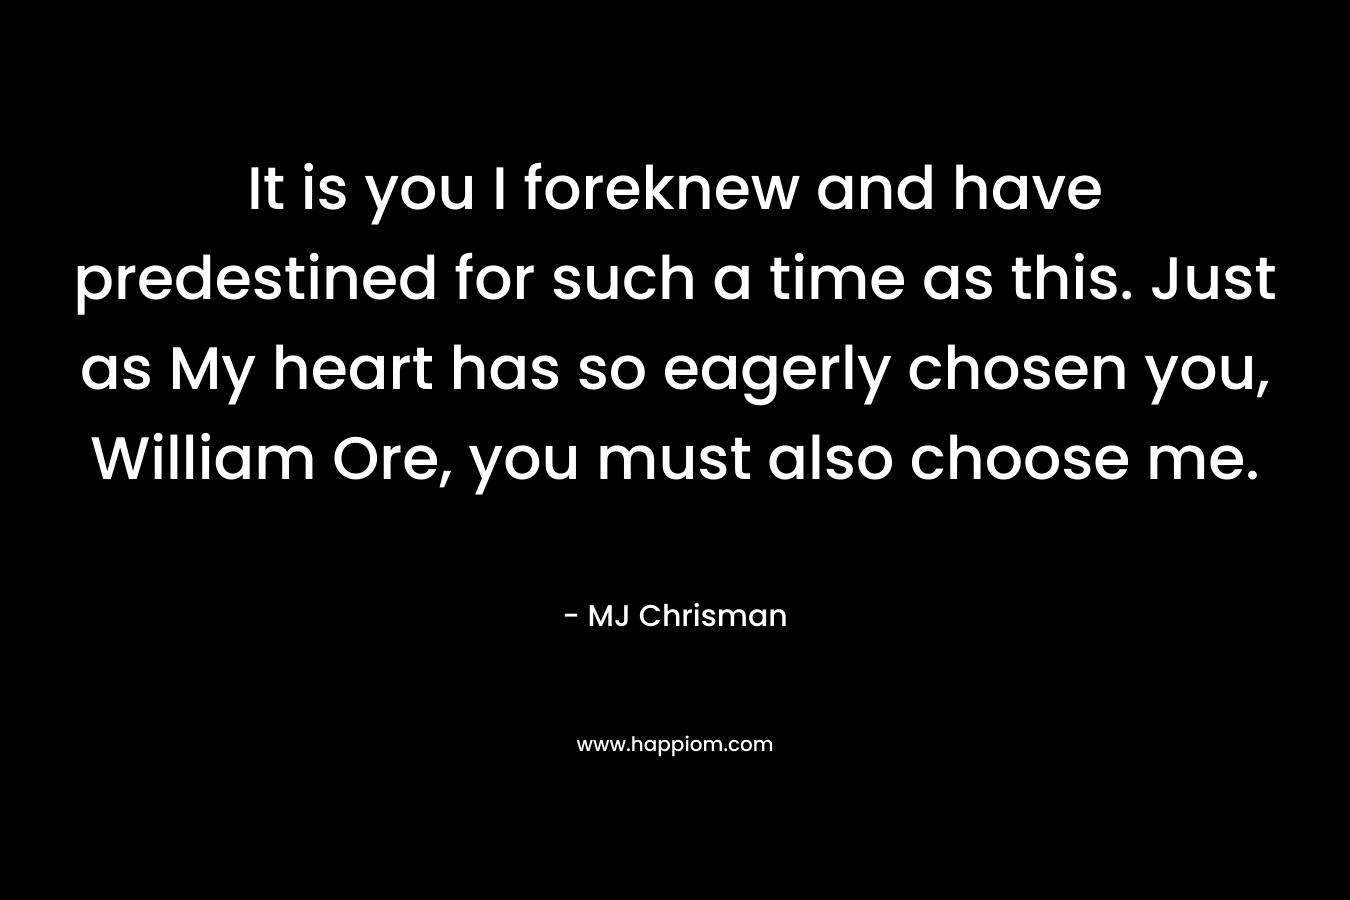 It is you I foreknew and have predestined for such a time as this. Just as My heart has so eagerly chosen you, William Ore, you must also choose me. – MJ Chrisman